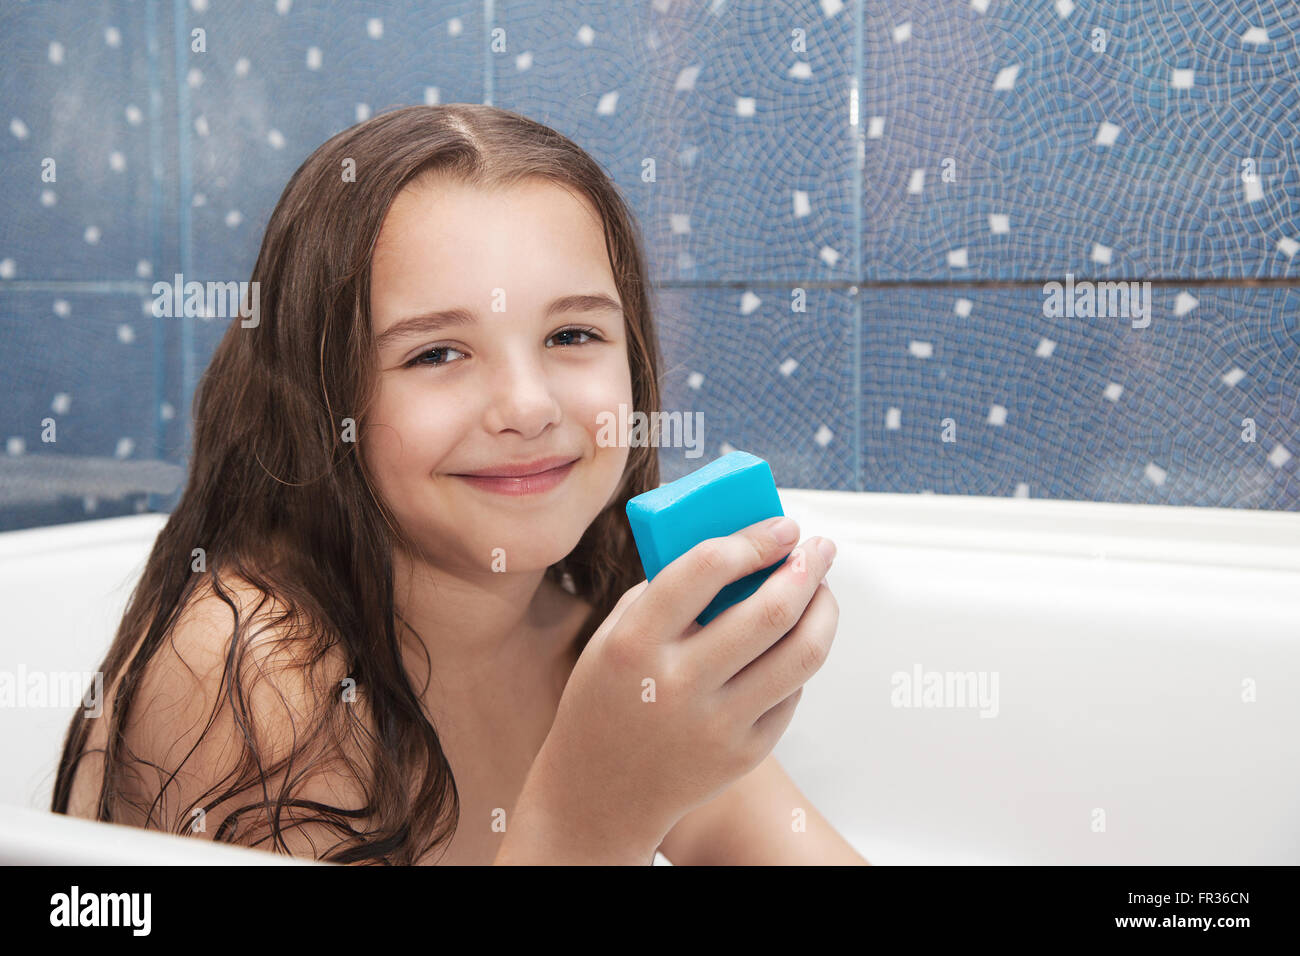 little smiling girl with long brown hair holding soap sitting in the ...